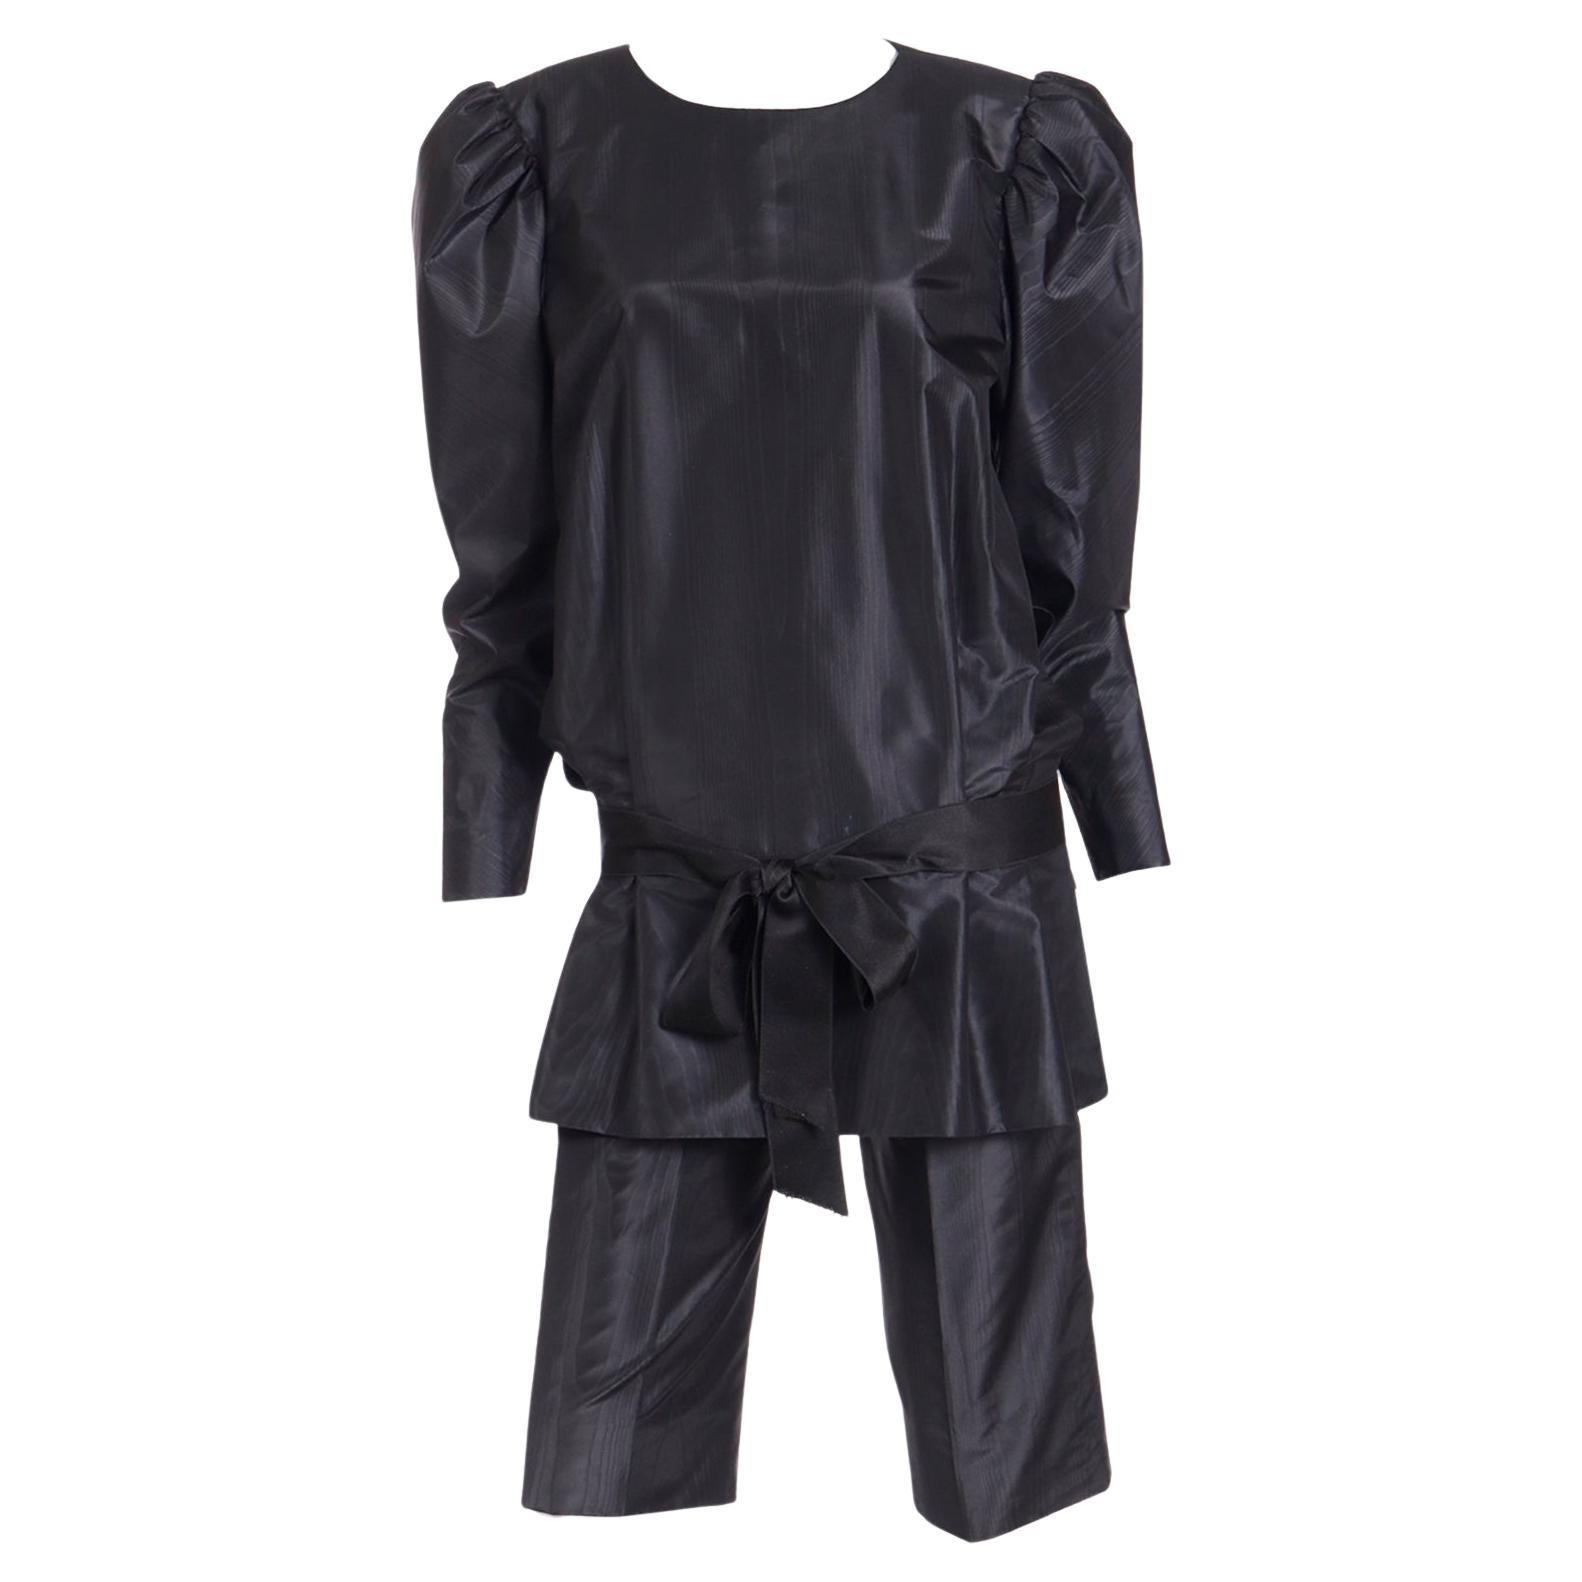 Givenchy Haute Couture Vintage 1980s Black Satin Shorts & Top Outfit